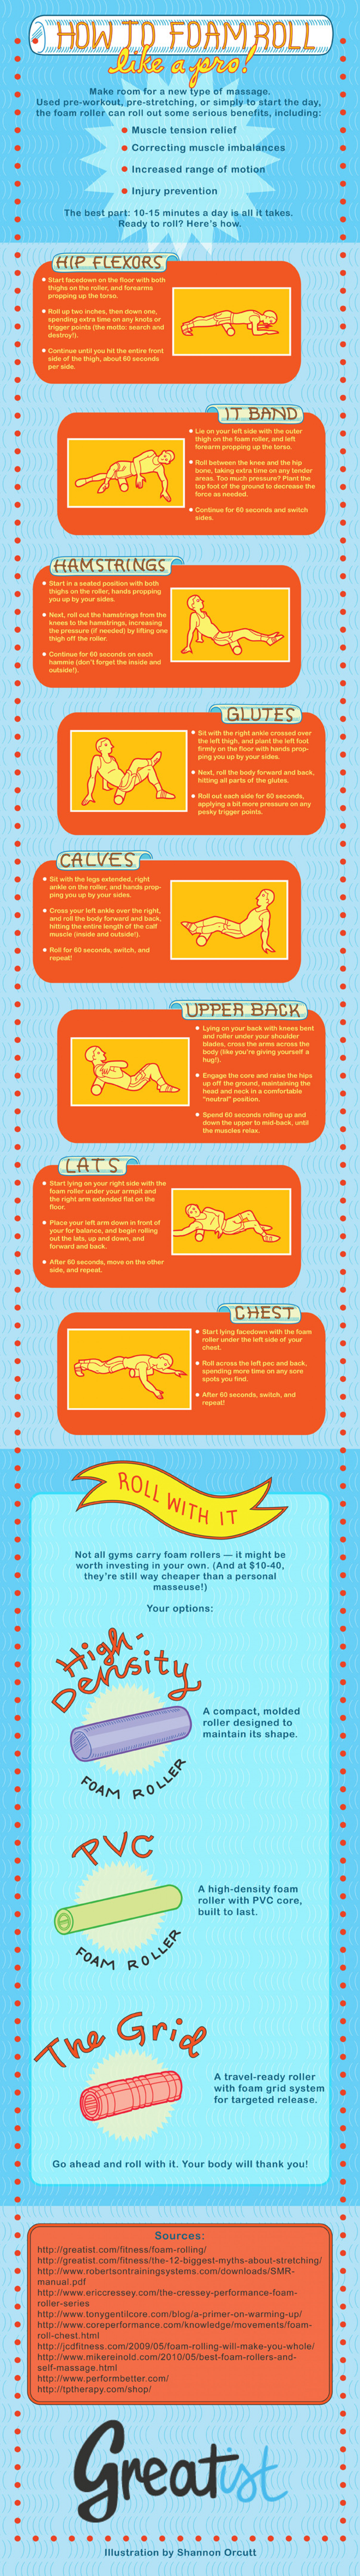 How To Foam Roll Like a Pro Infographic